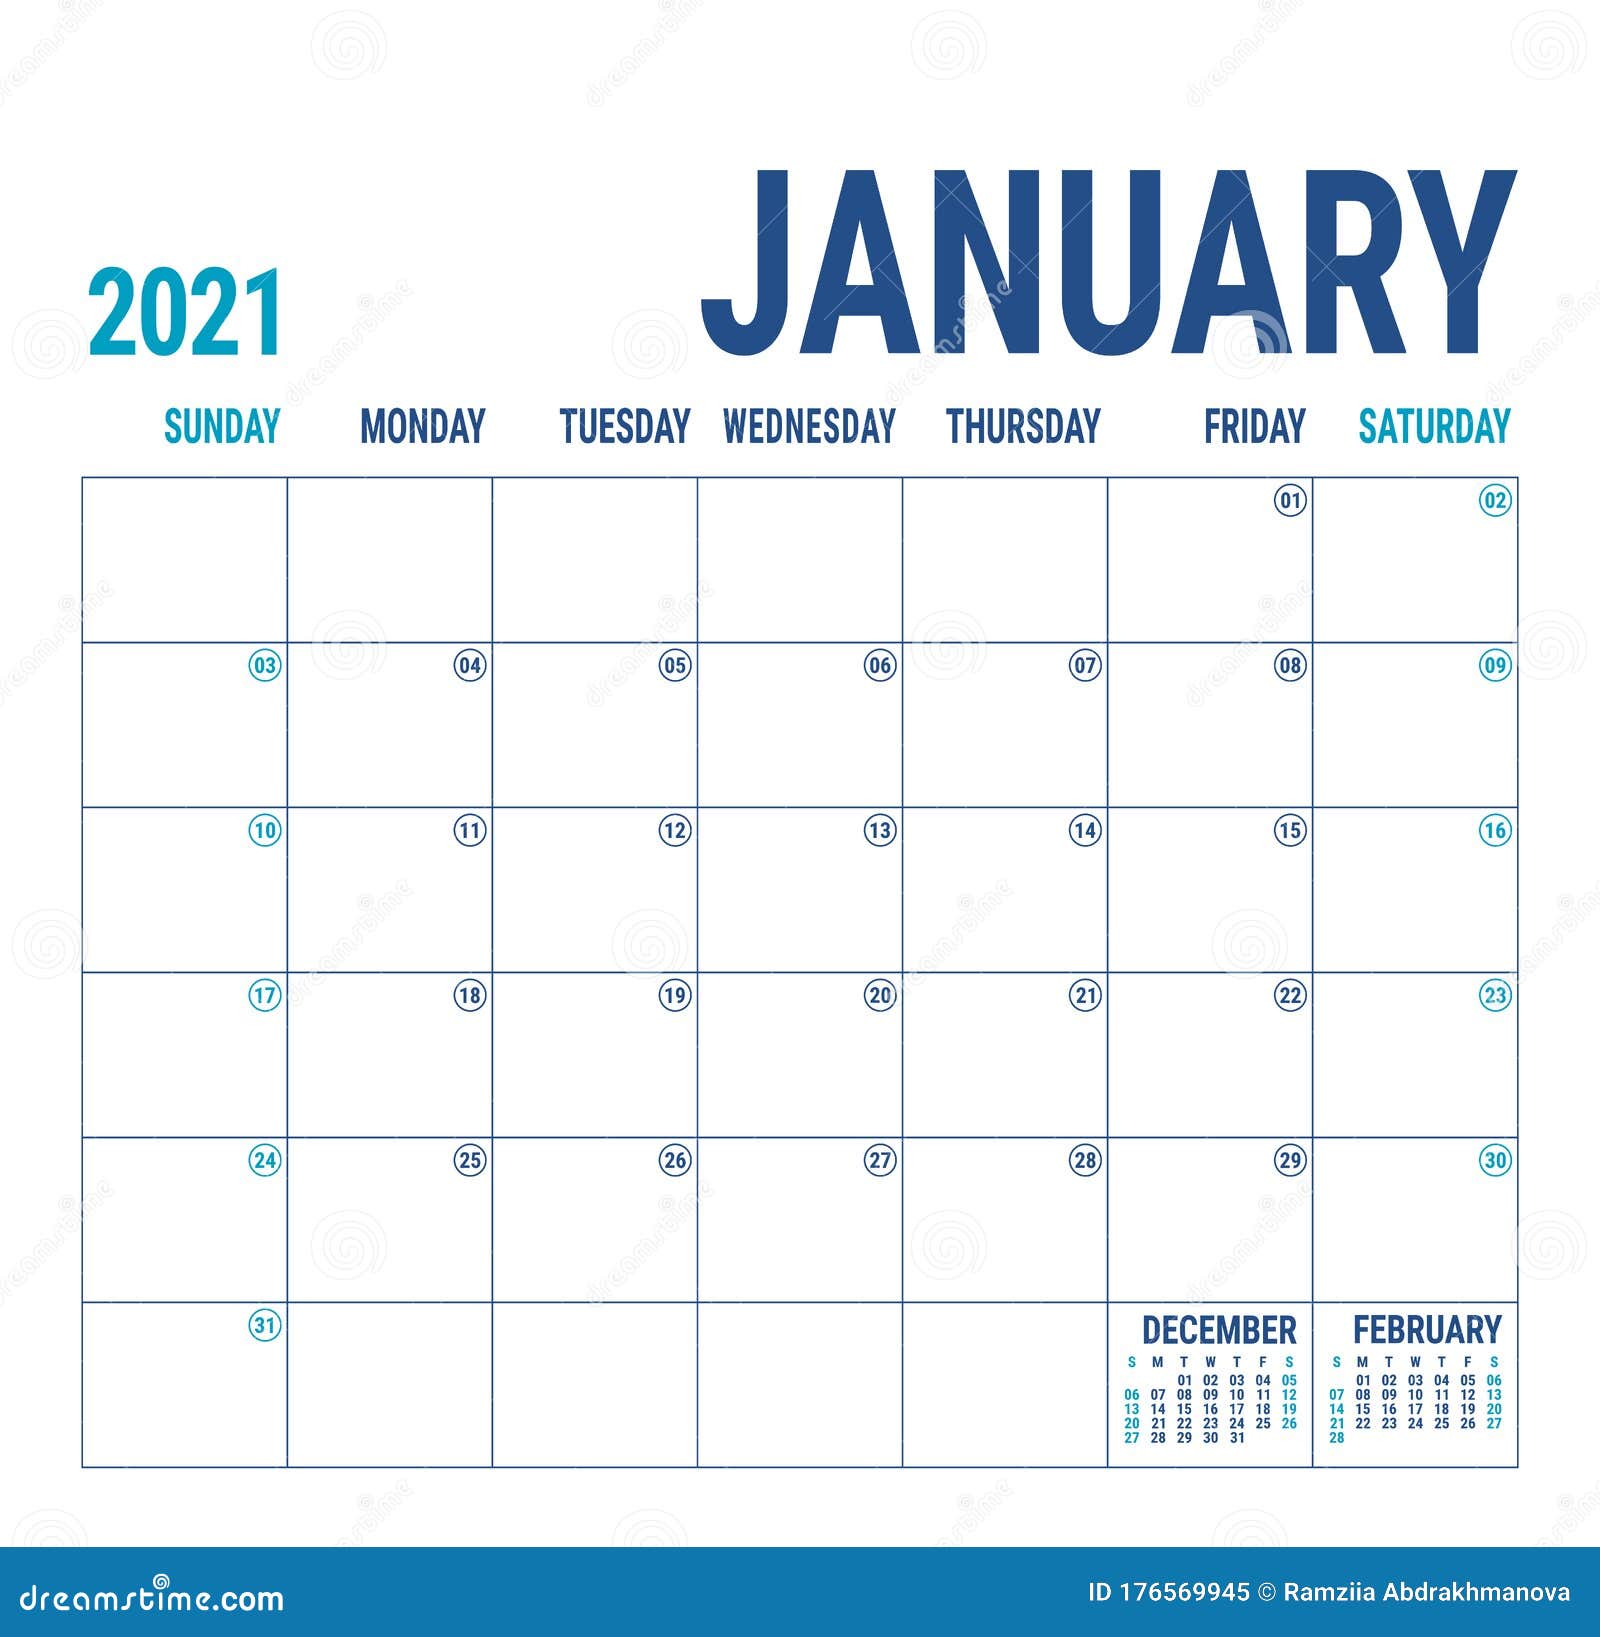 January Calendar 21 English Calender Template Vector Square Grid Office Business Planning Creative Design Blue Color Stock Vector Illustration Of Original Grid